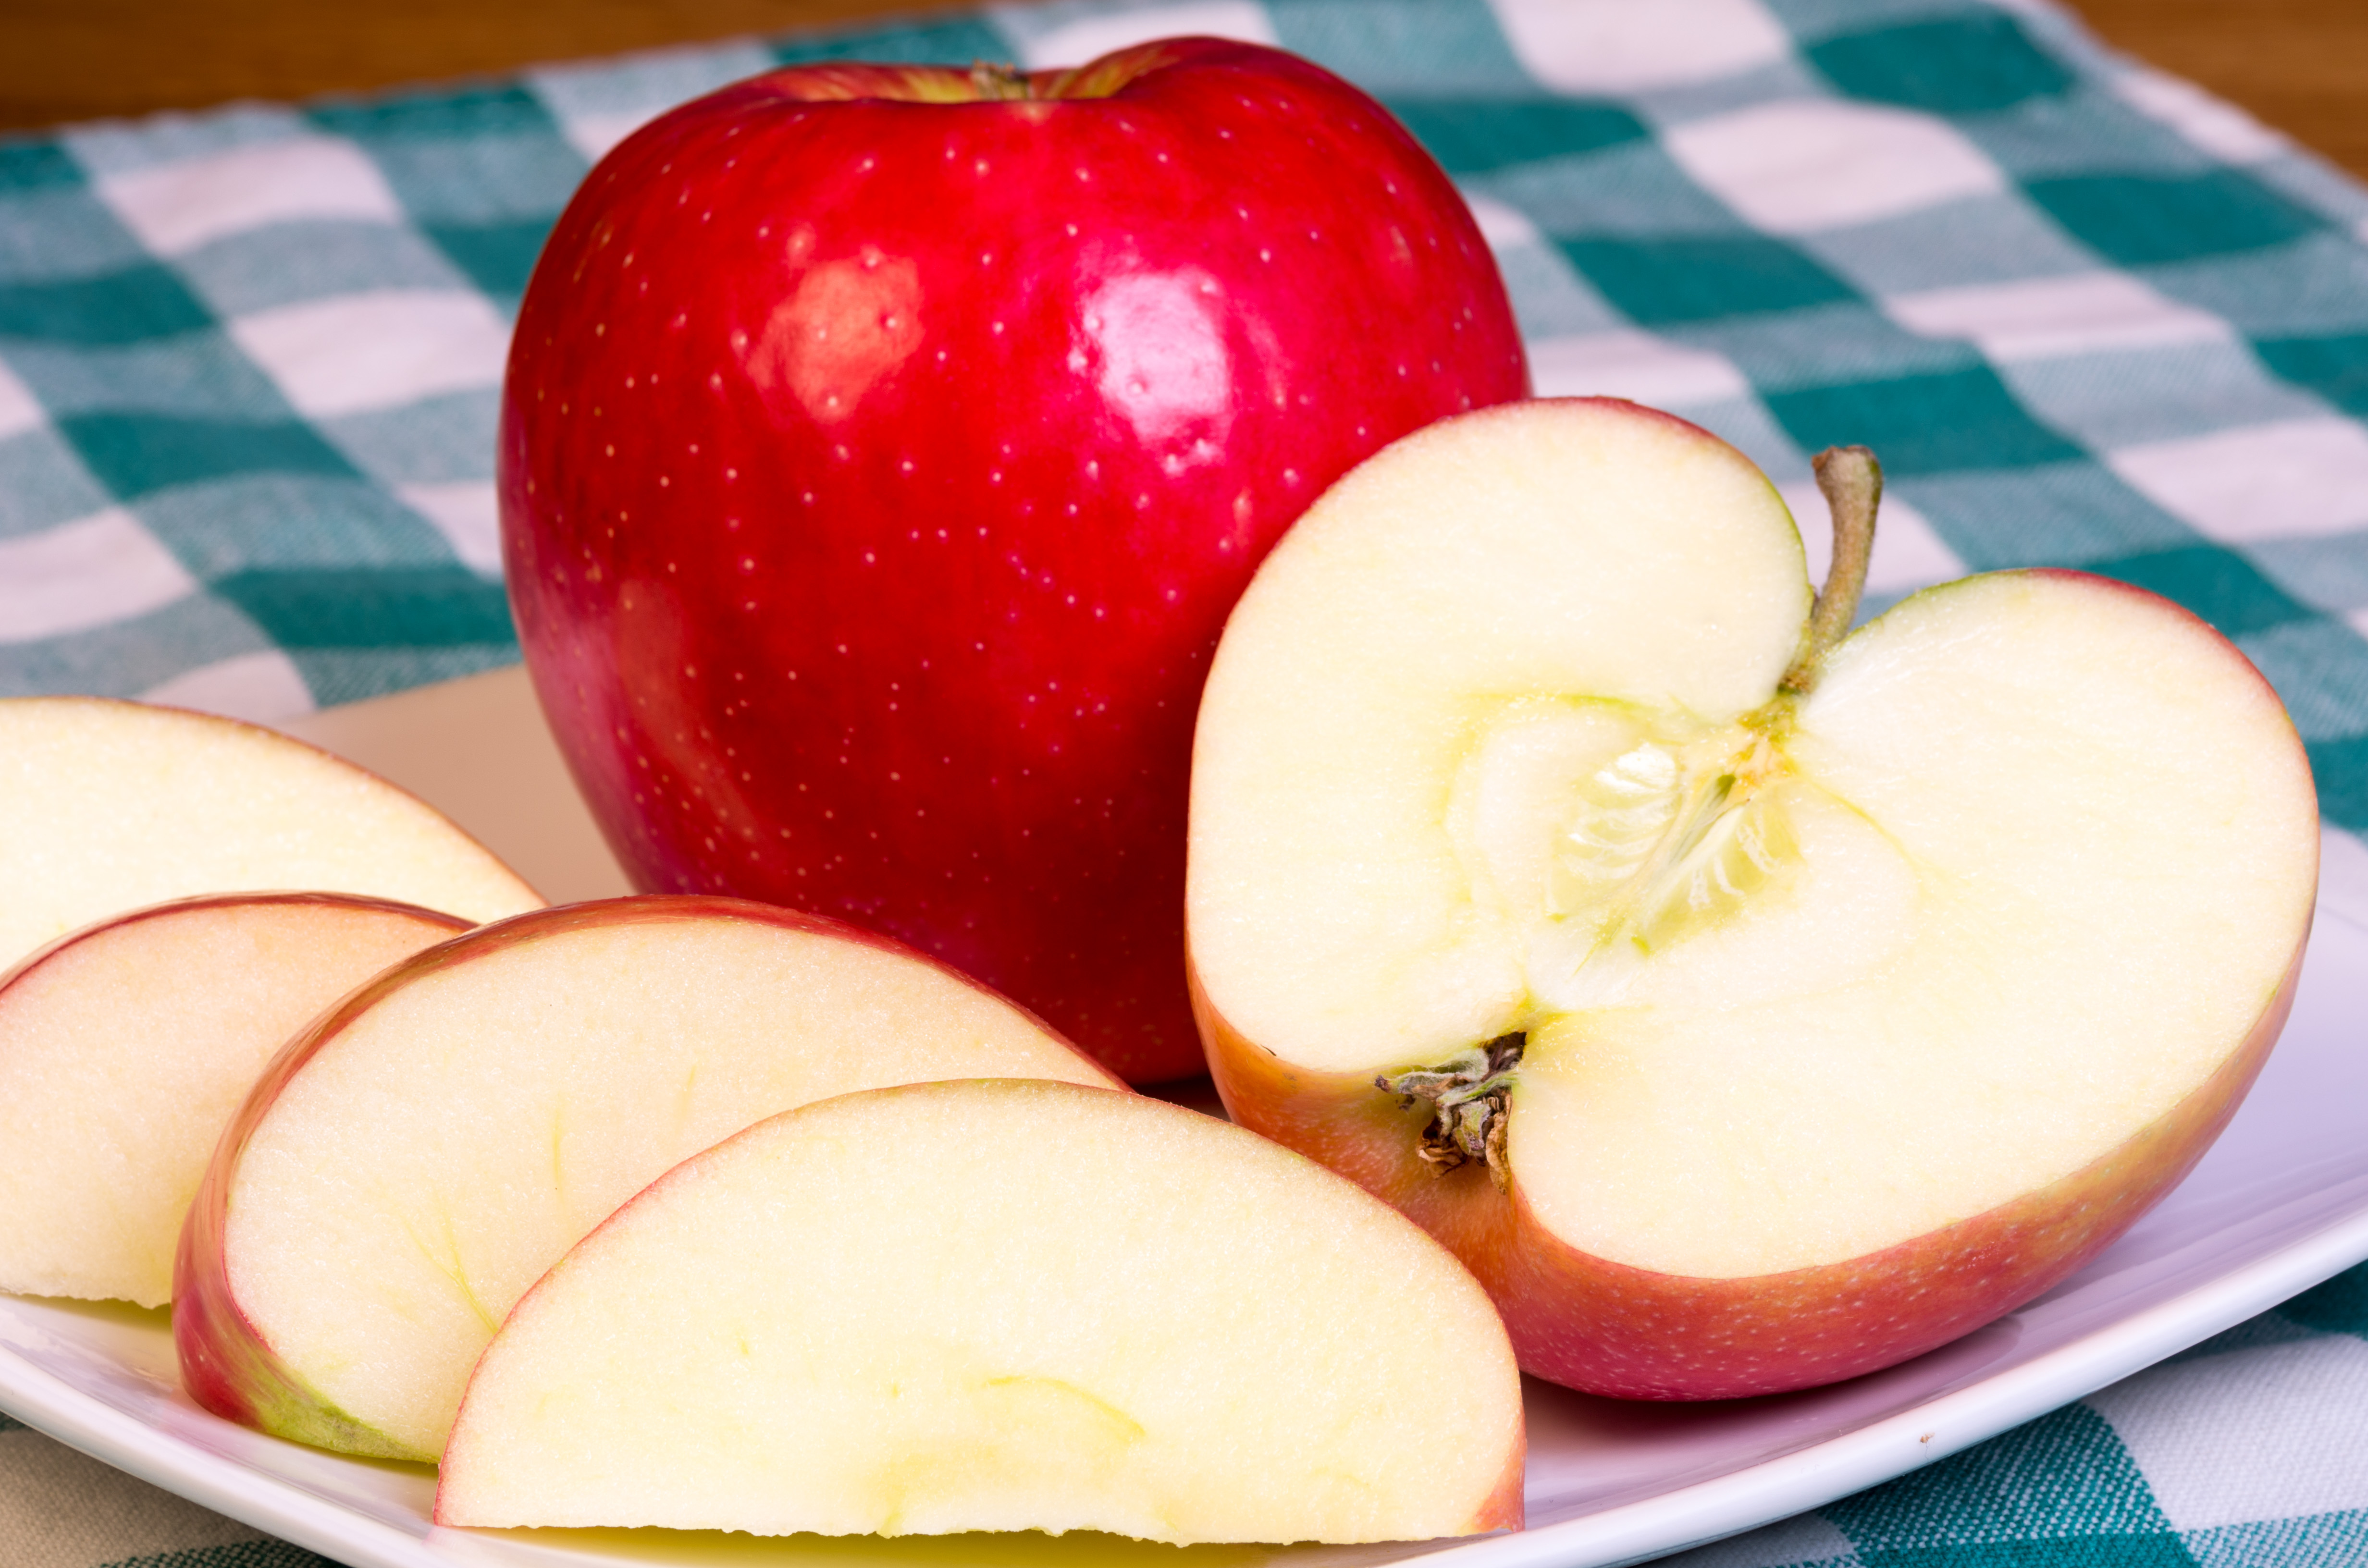 Three Best Apples for Baking this Week in Oregon - Fresh From Oregon